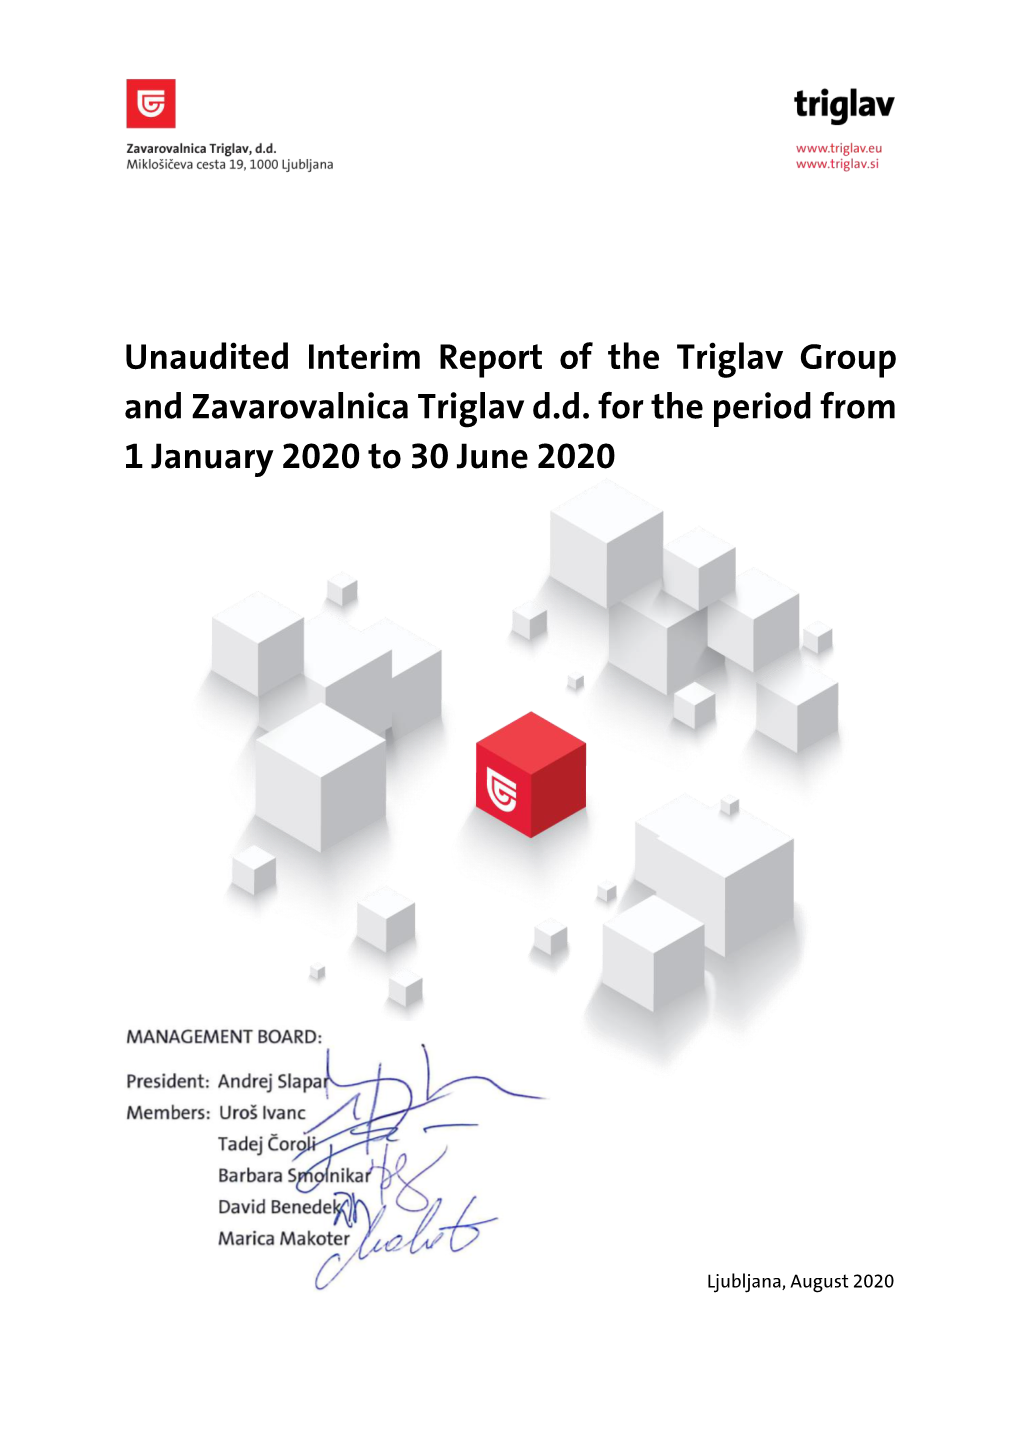 Unaudited Interim Report of the Triglav Group and Zavarovalnica Triglav D.D. for the Period from 1 January 2020 to 30 June 2020